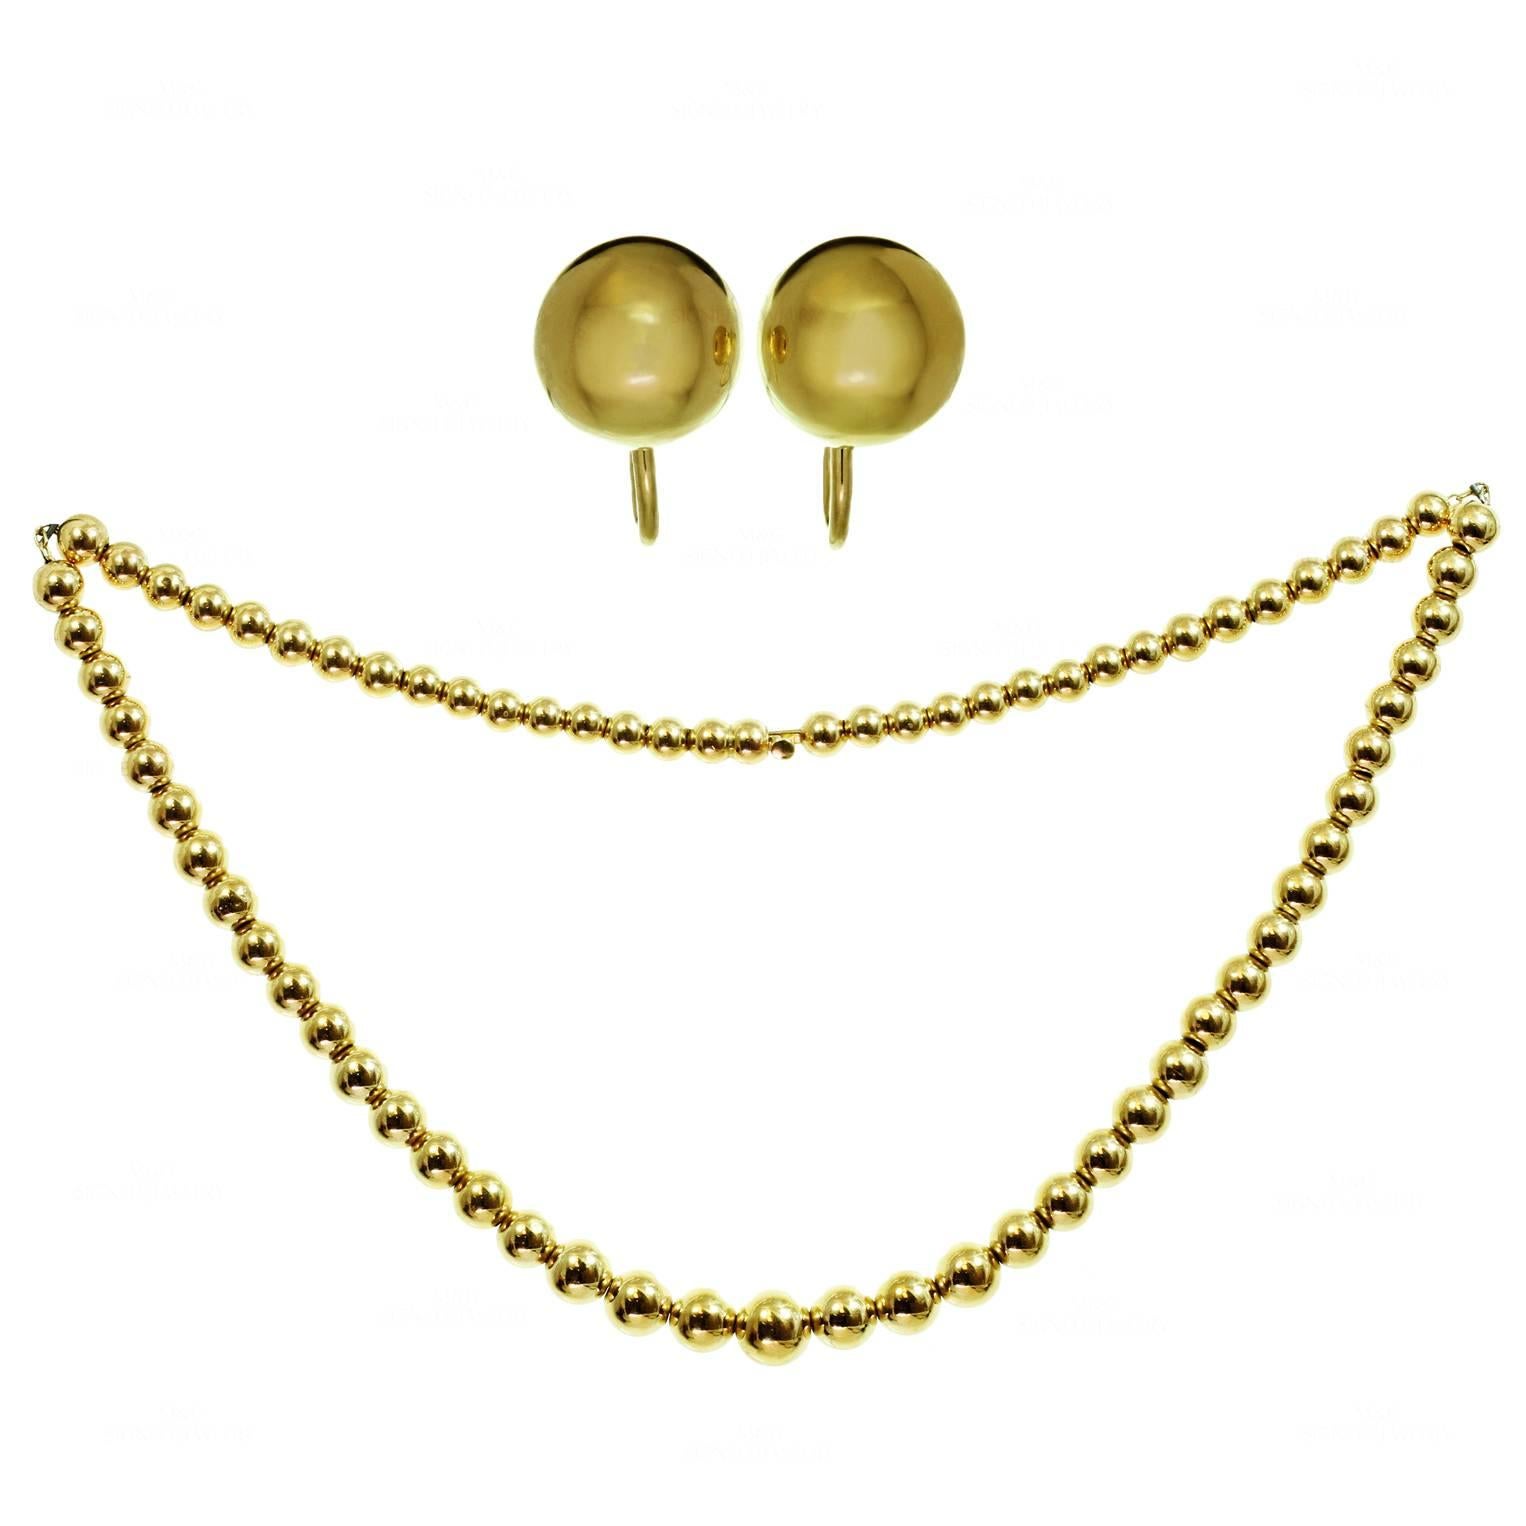 1980s Tiffany & Co. Gold Bead Necklace and Earrings Suite